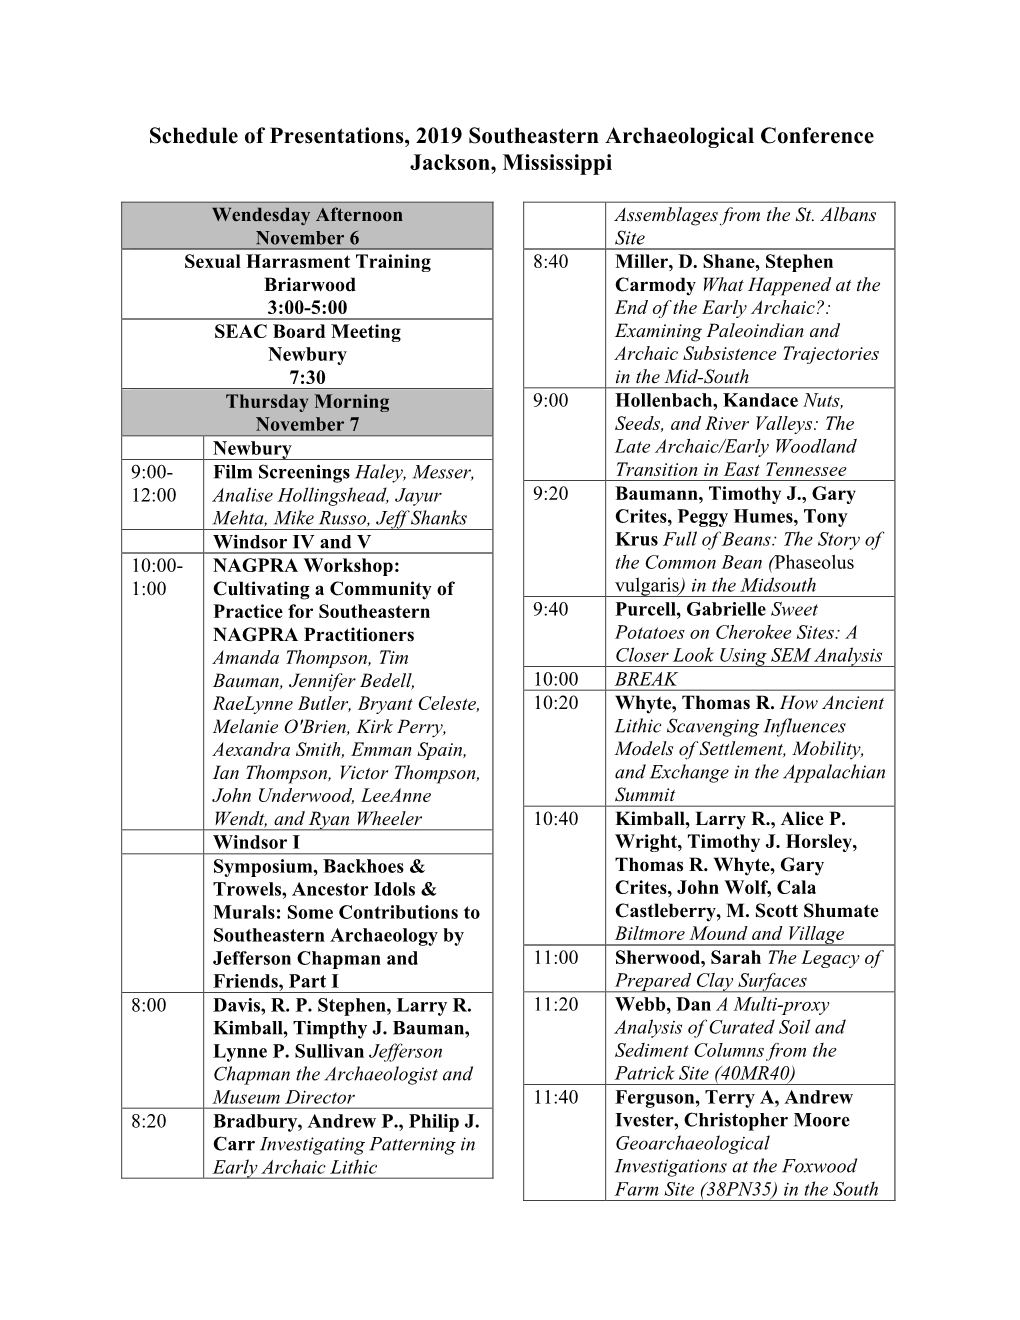 Schedule of Presentations, 2019 Southeastern Archaeological Conference Jackson, Mississippi